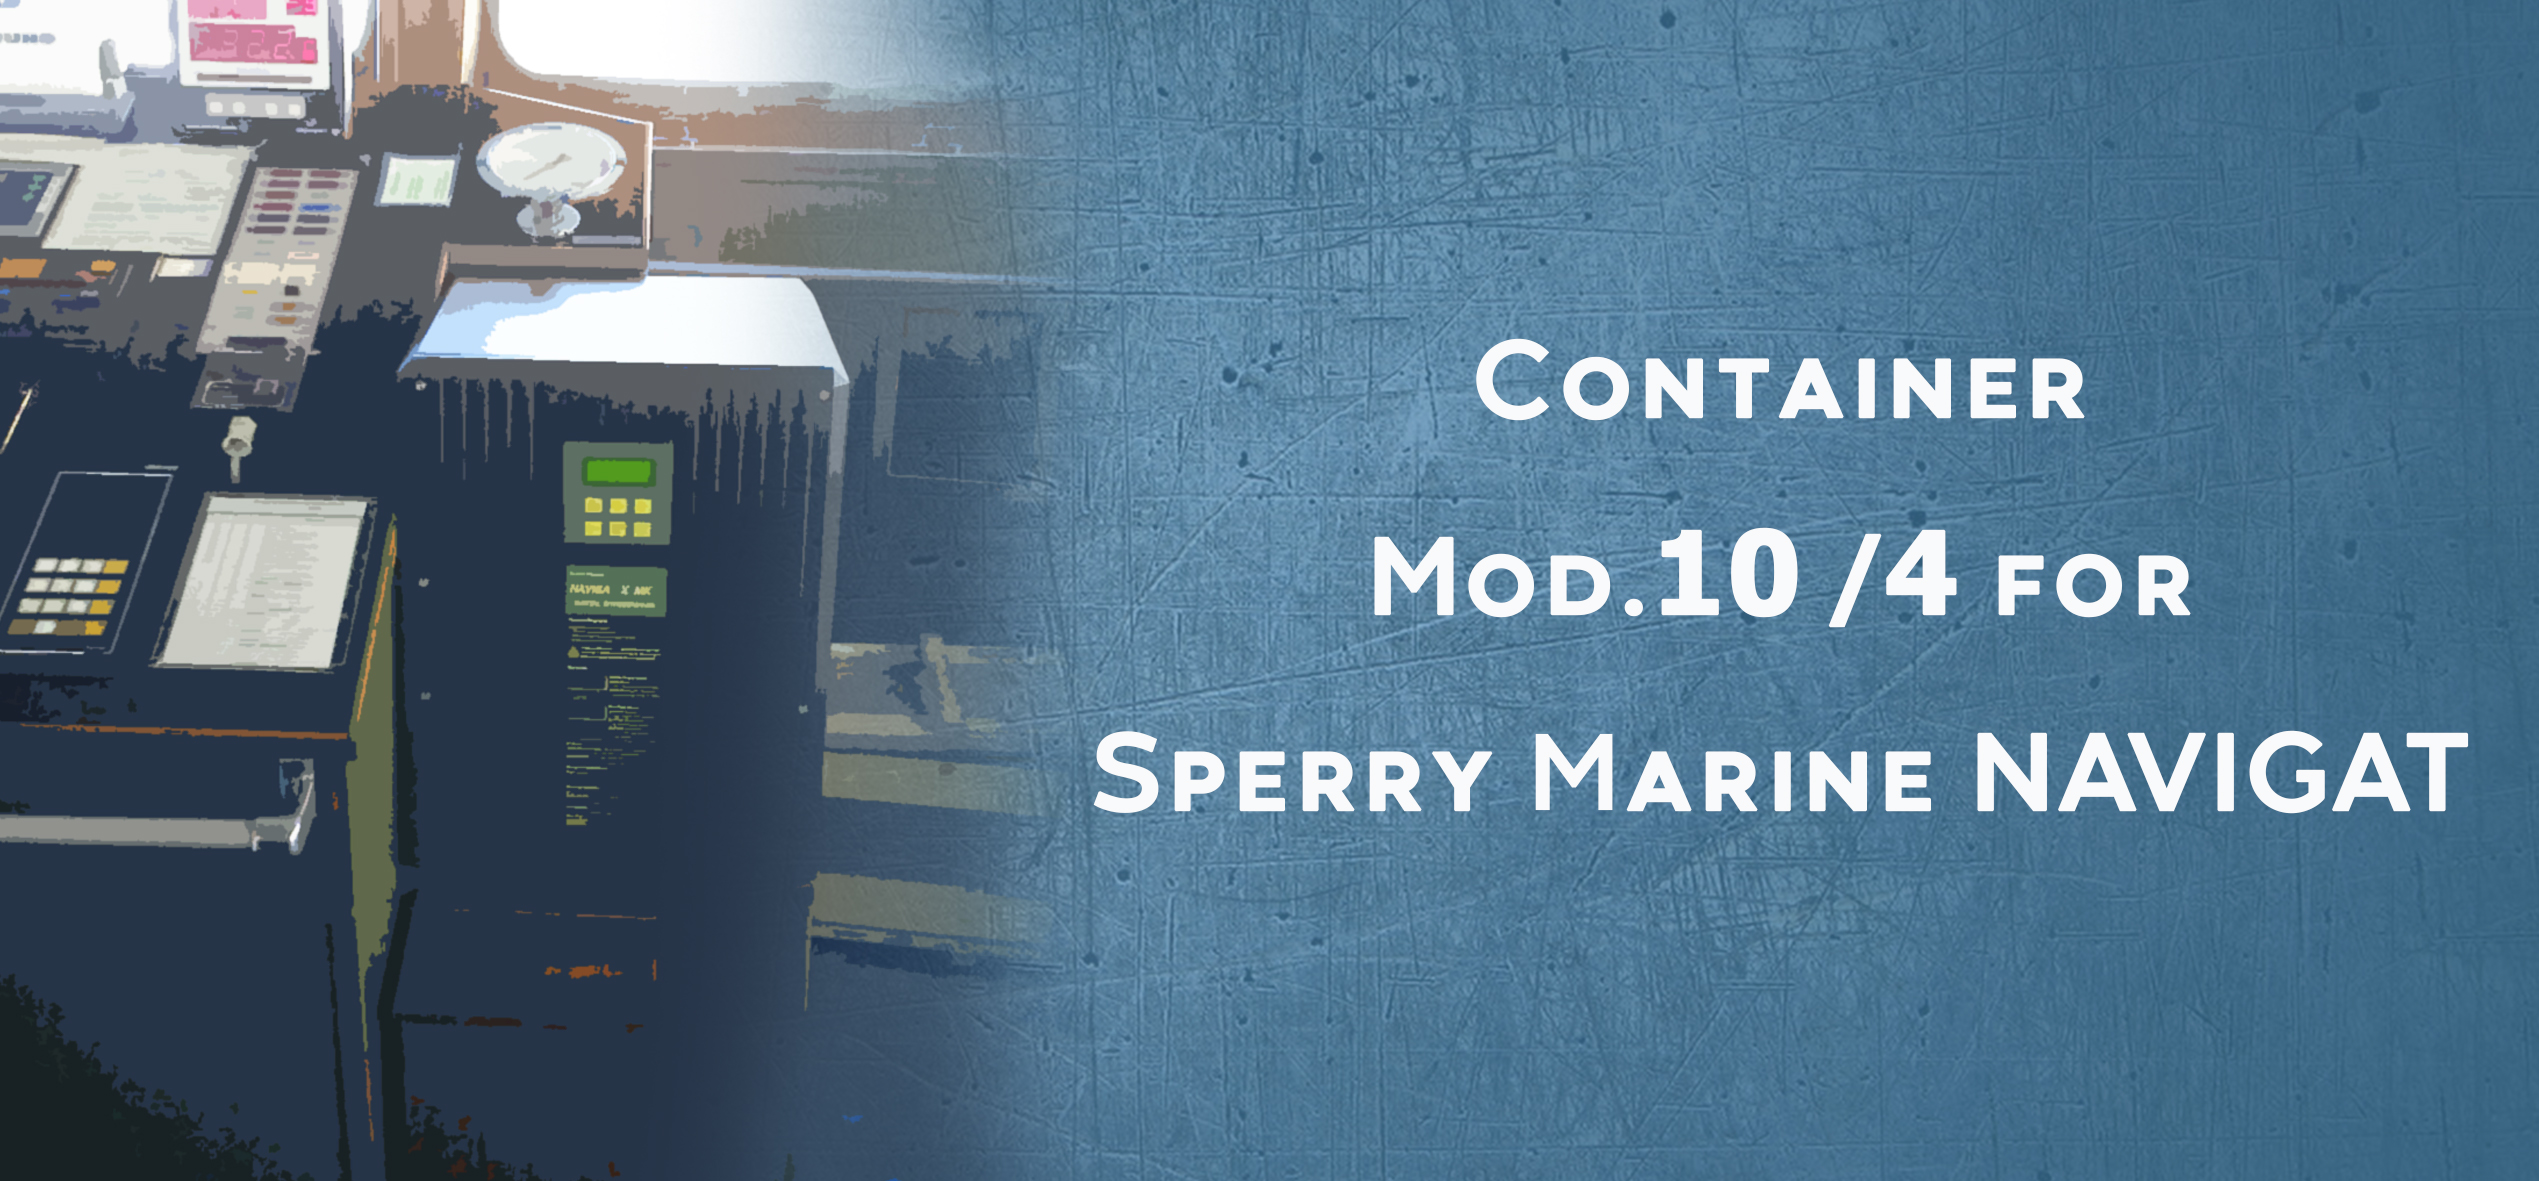 New Gyrosphere Container Mod.10 / 4 for Sperry Marine NAVIGAT Gyrocompass